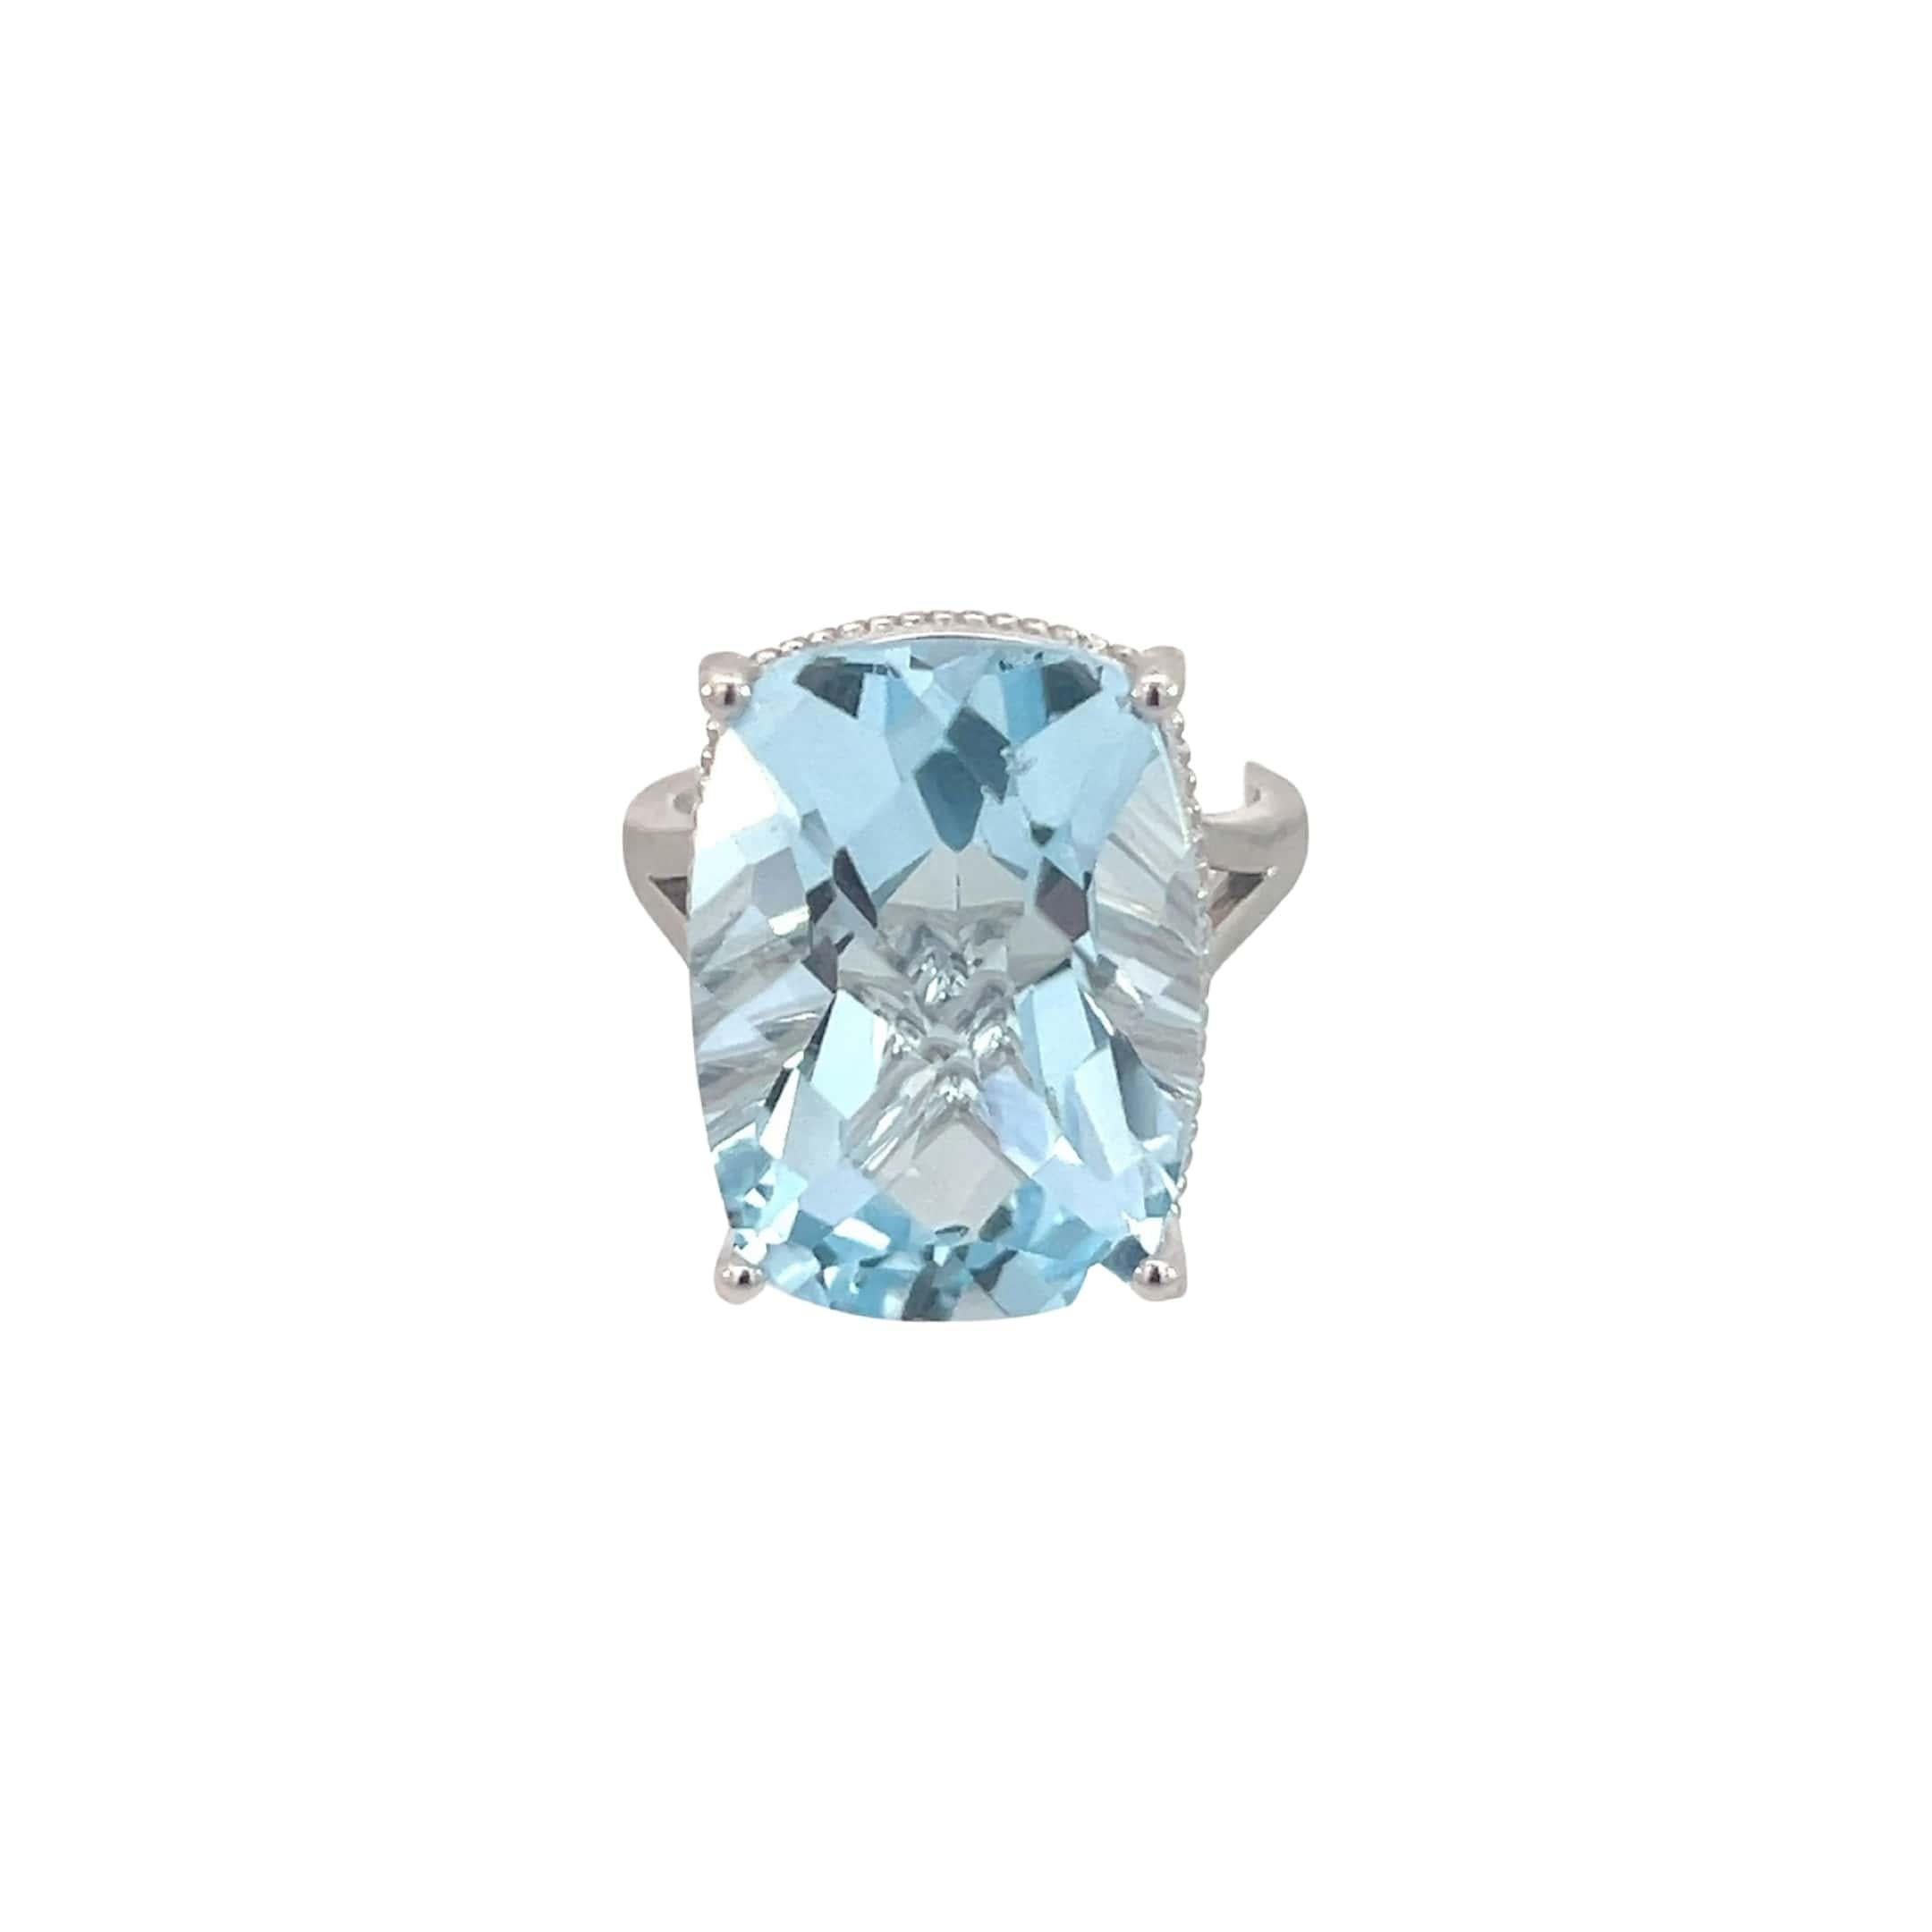 Natural Finely Faceted Quality Solitaire Blue Topaz Ring 6.5 14k W Gold 19.58 Cts Certified $3,950 310546

This is a one of a Kind Unique Custom Made Glamorous Piece of Jewelry!

Nothing says, “I Love you” more than Diamonds and Pearls!

This Topaz